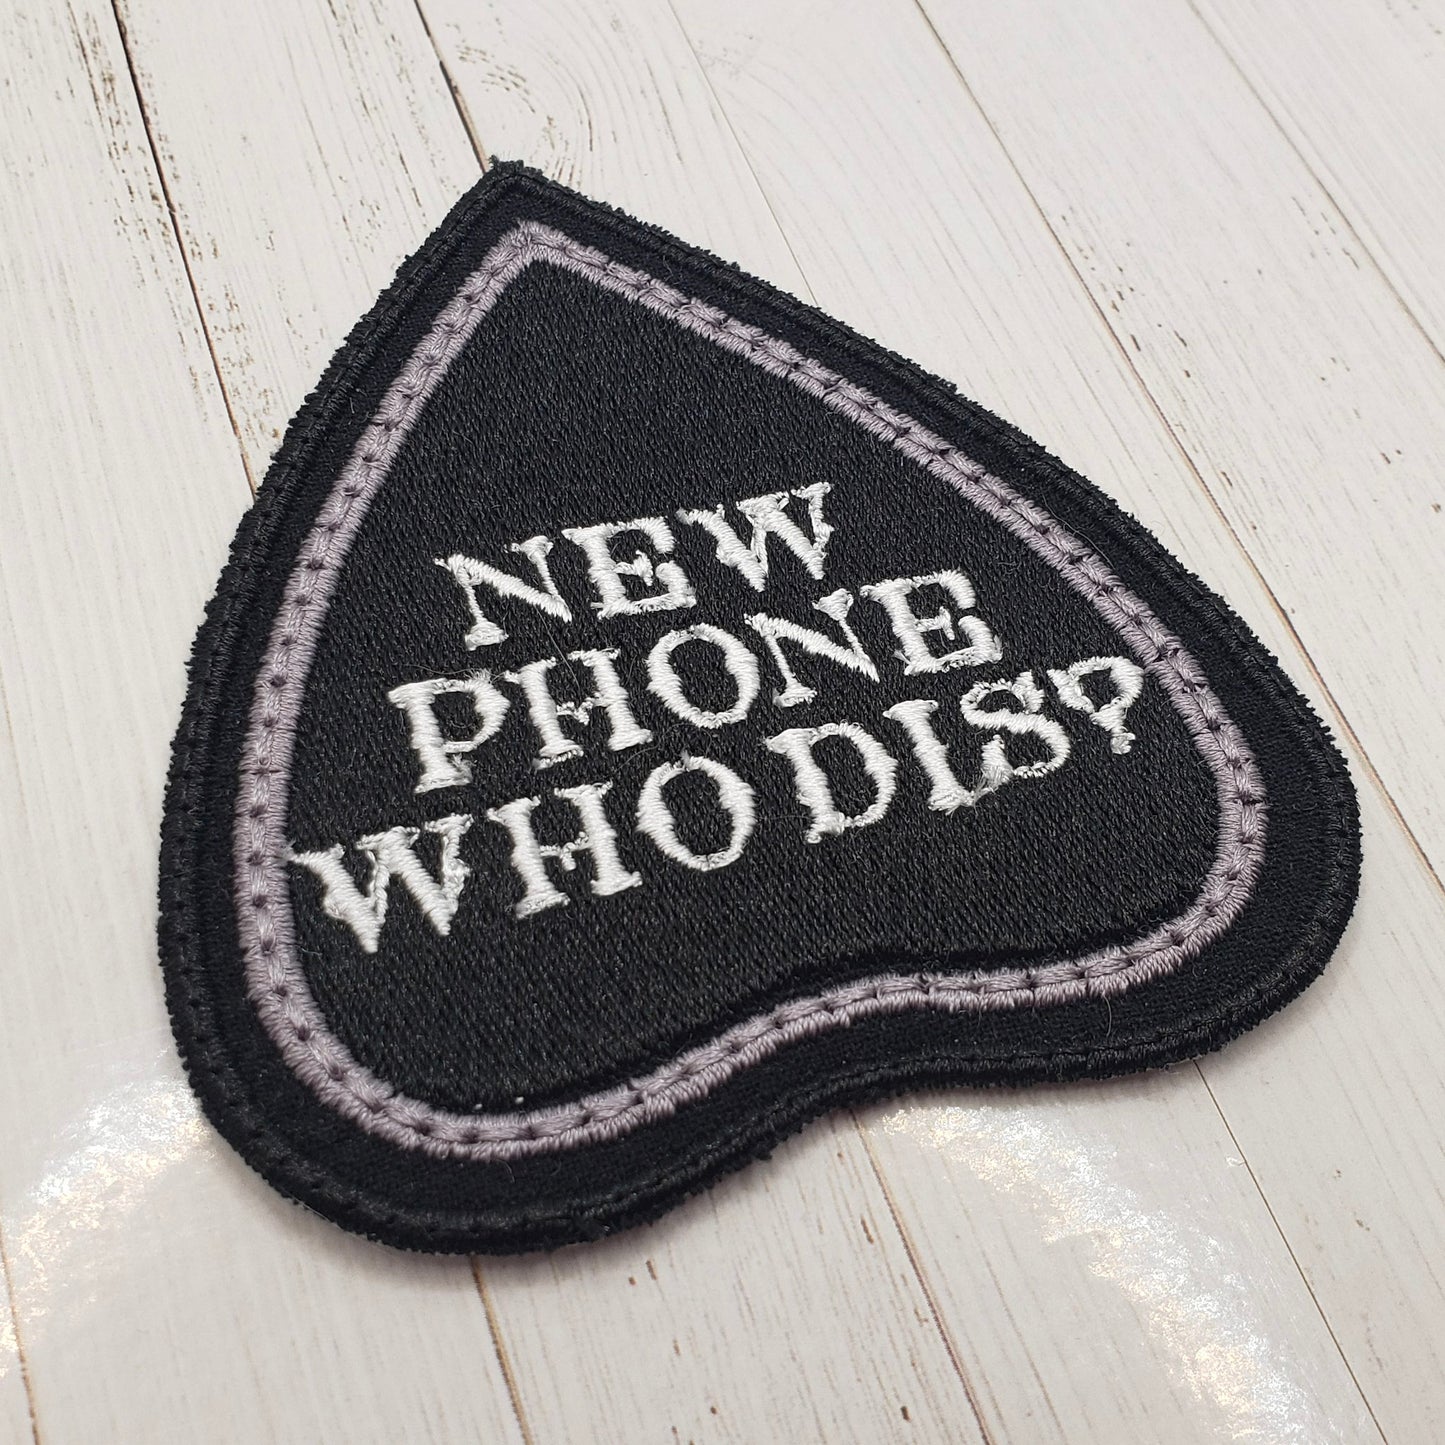 New Phone Who Dis Planchette Embroidered Patch